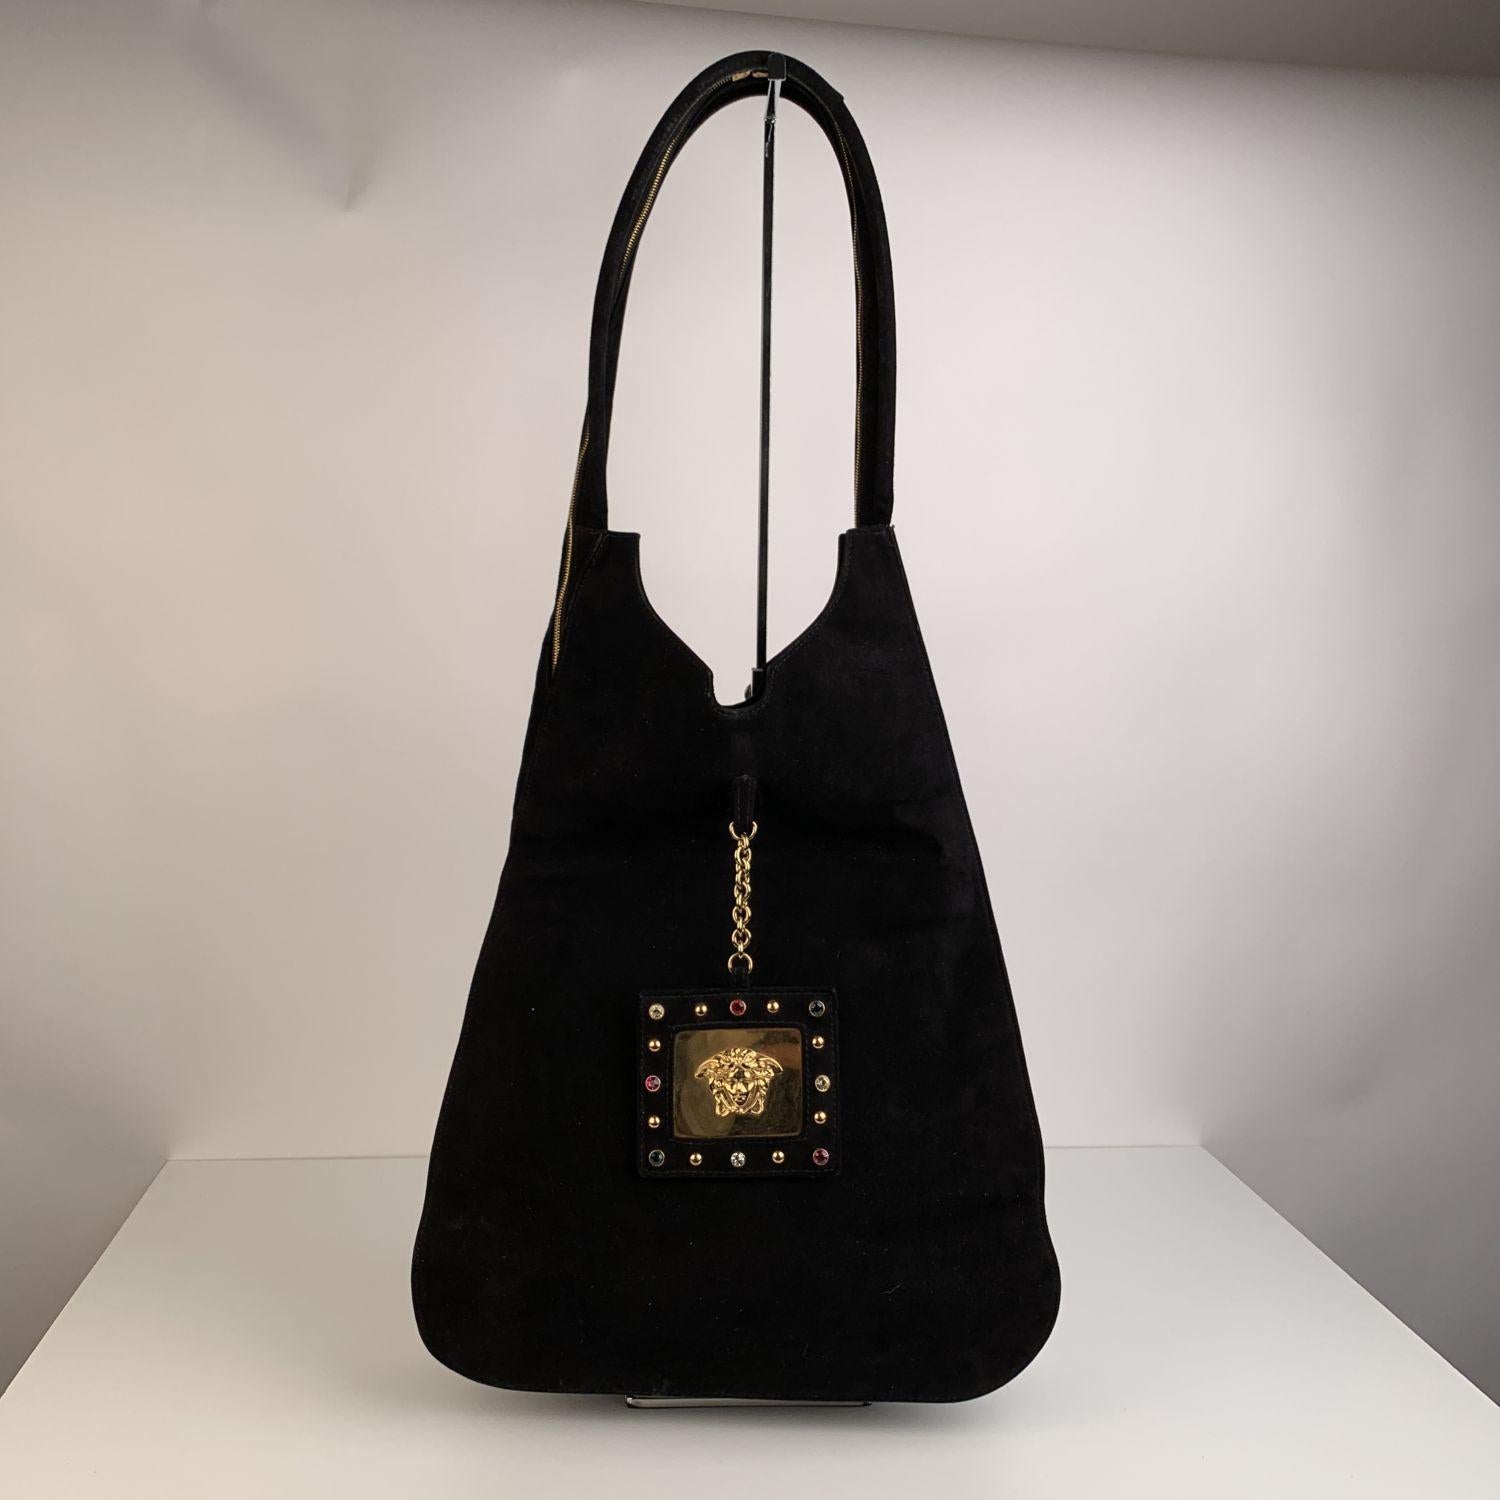 This bag was authenticated by REAL AUTHENTICATION.

Gianni Versace Vintage black suede hobo bag with multicolored rhinestones detailing. Double wrap-around zipper closure (the closure is located along the entire length of the shoulder straps). 2